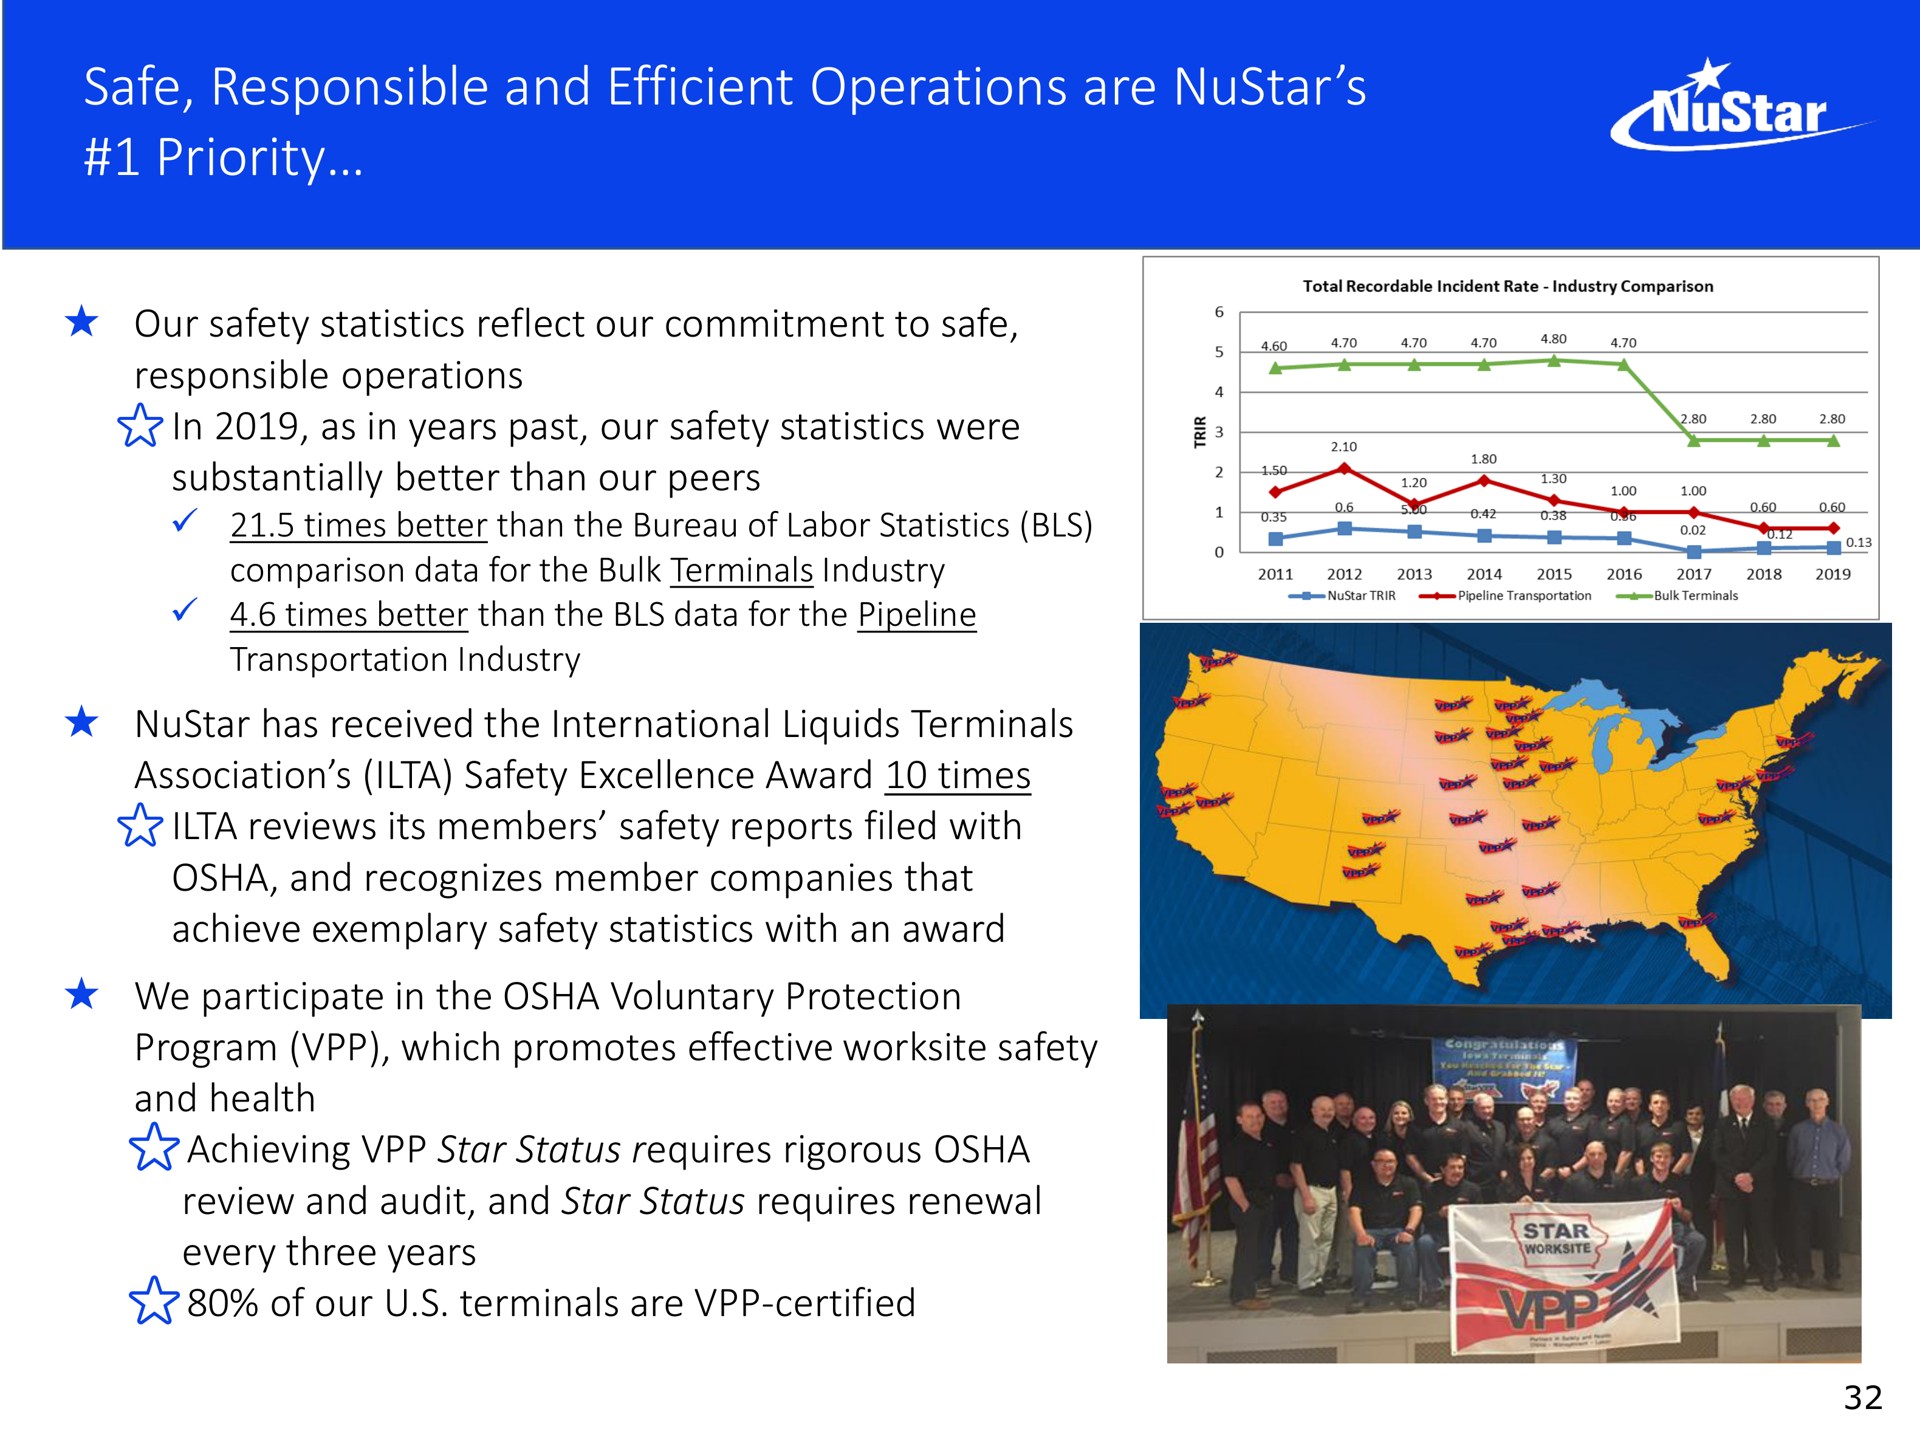 safe responsible and efficient operations are priority | NuStar Energy